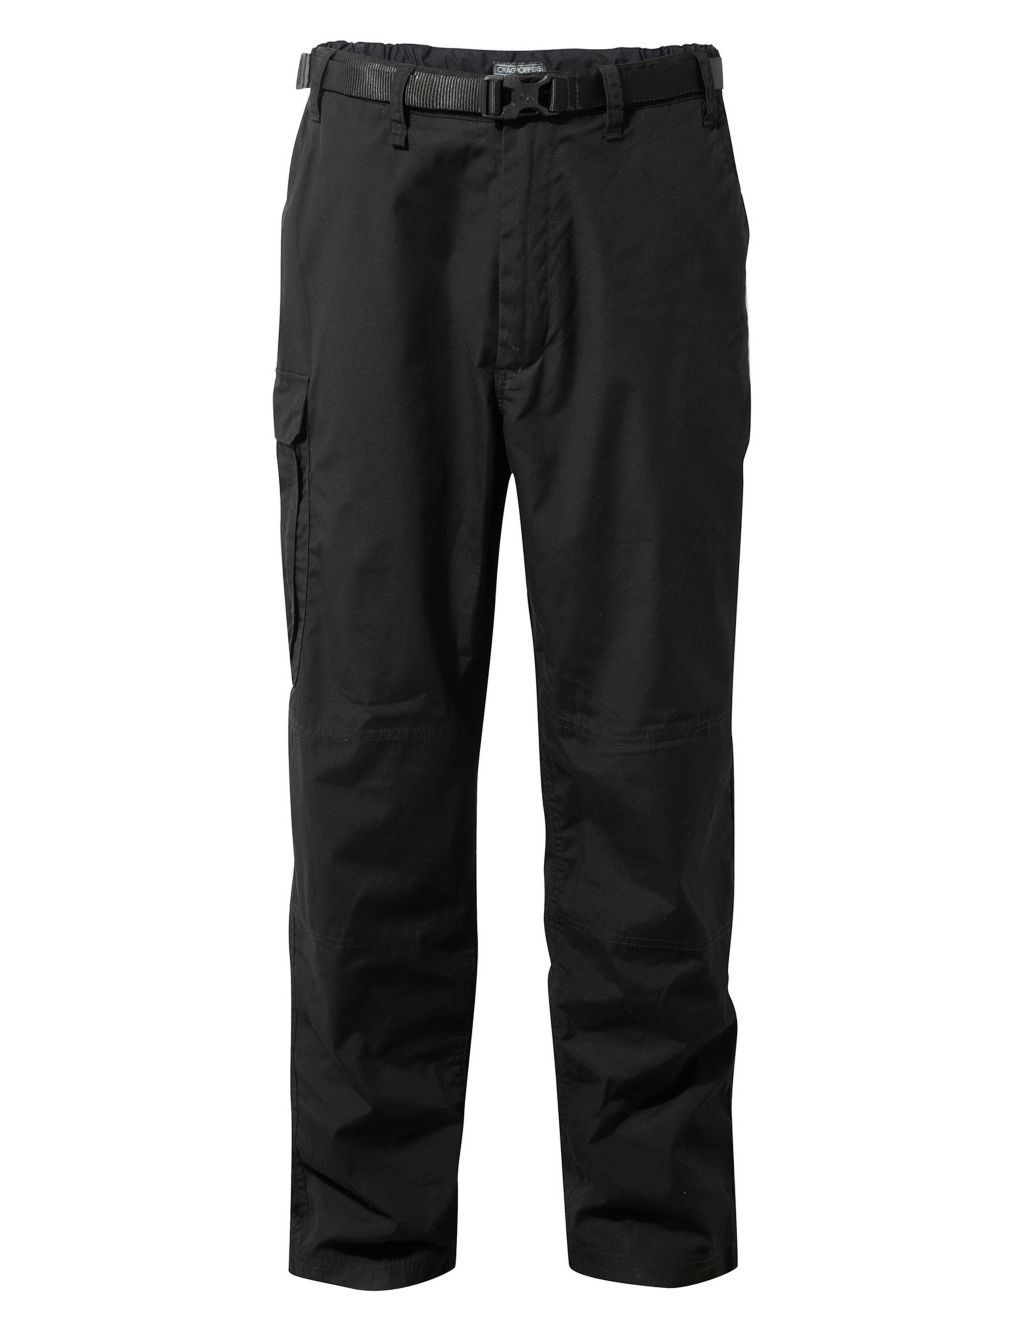 Kiwi Loose Fit Cargo Trousers image 2